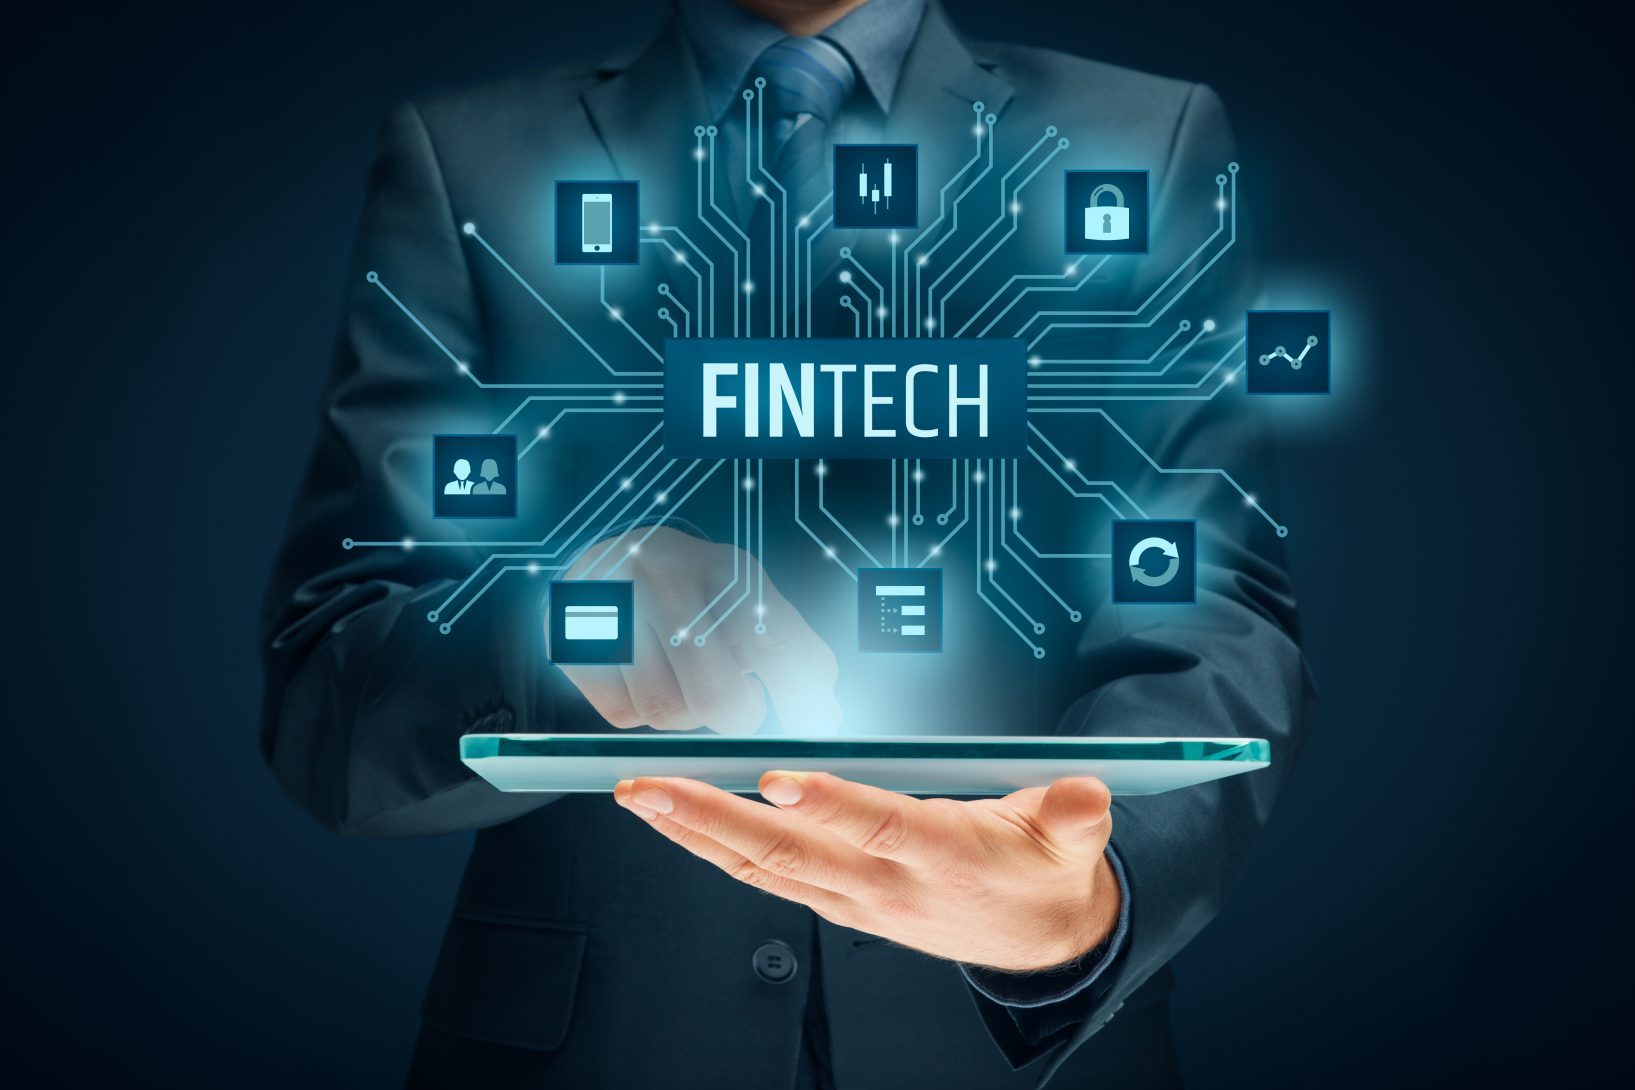 Article about Firoz Patel: What is Fintech